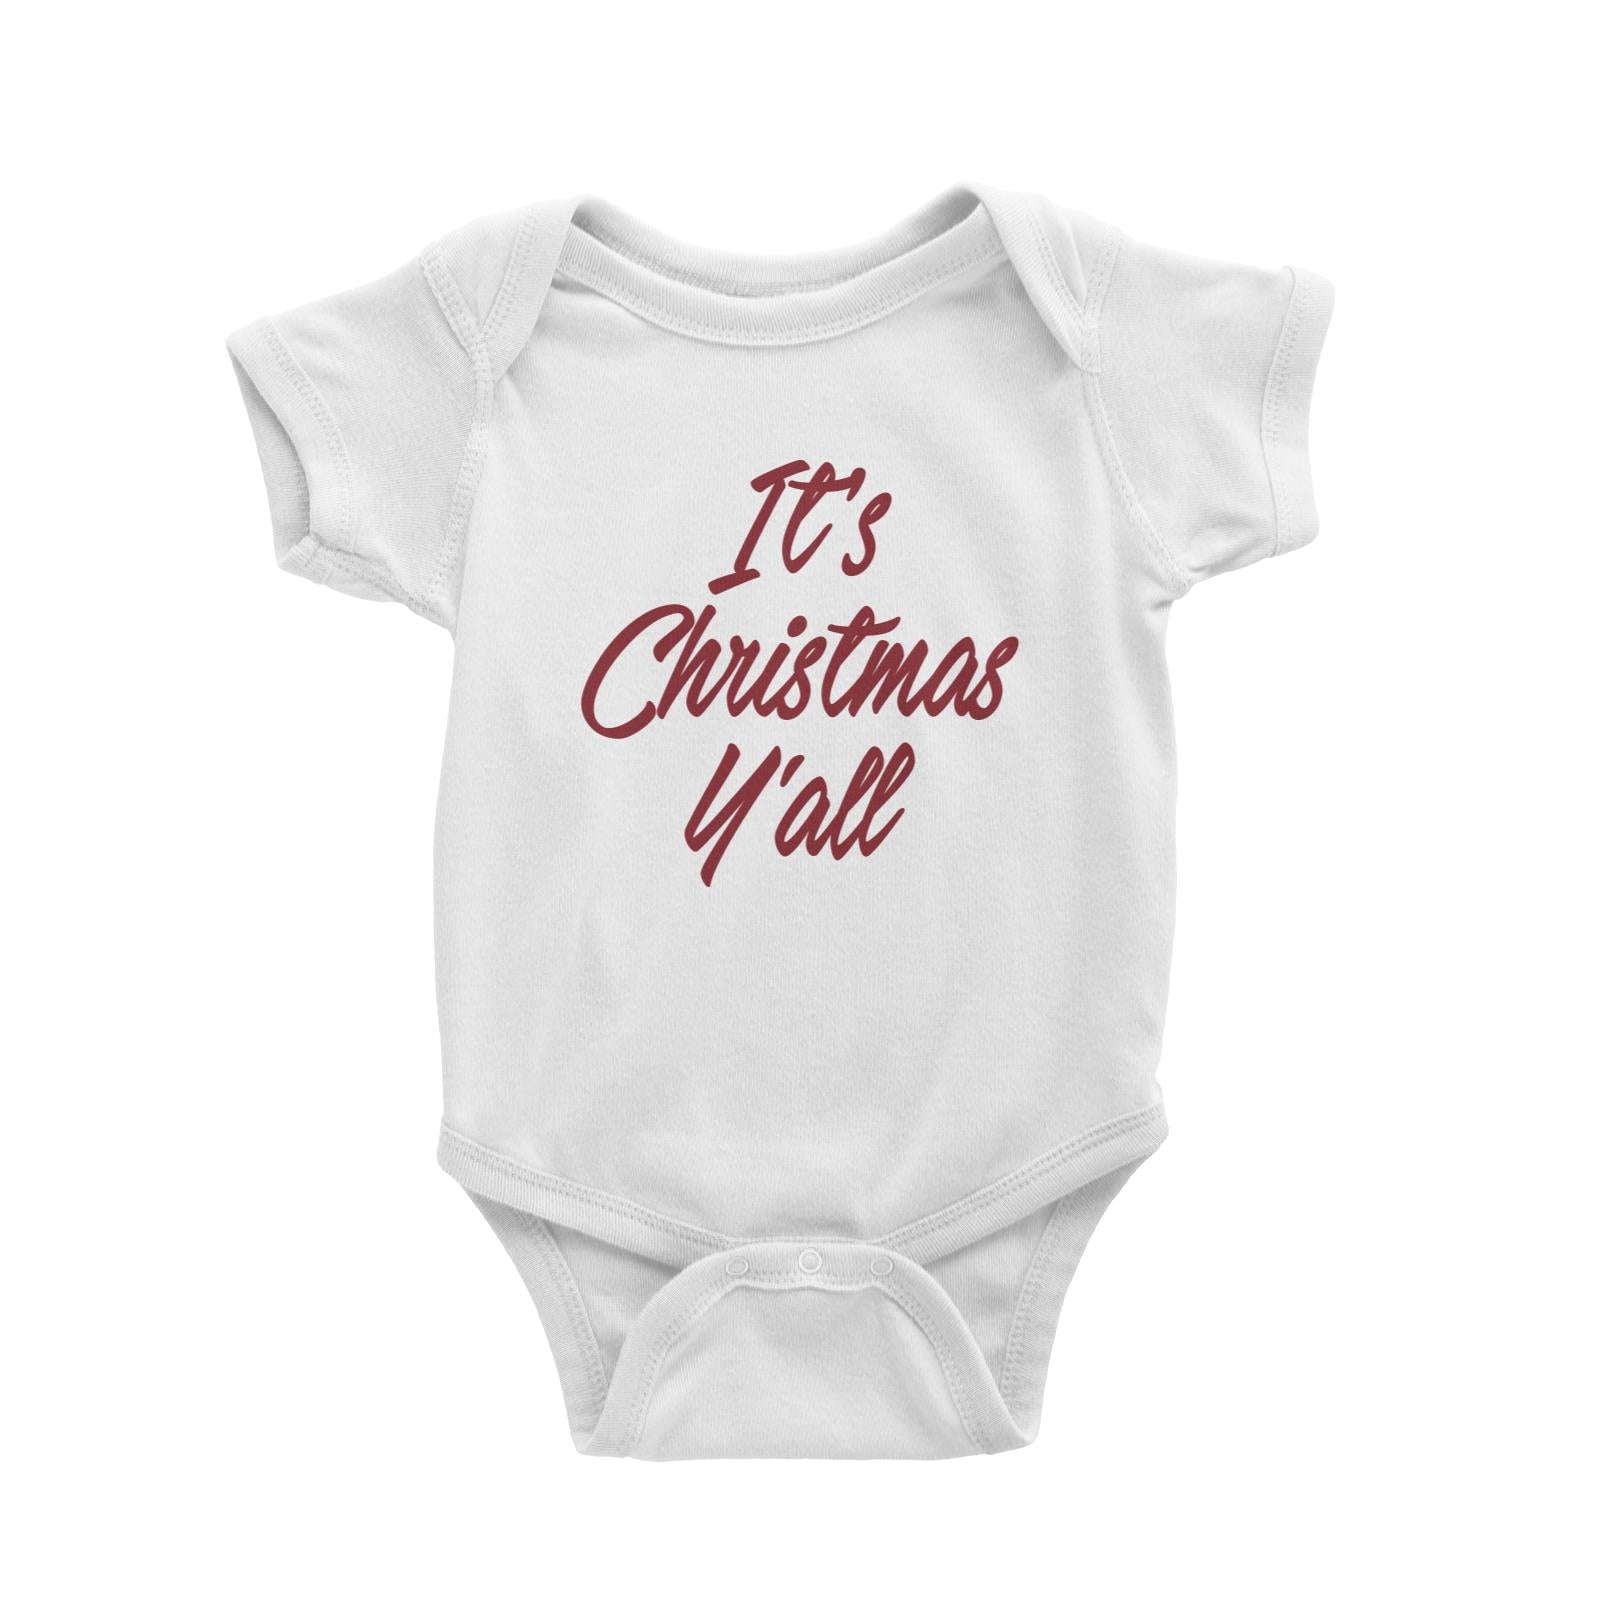 It's Christmas Y'all Baby Romper